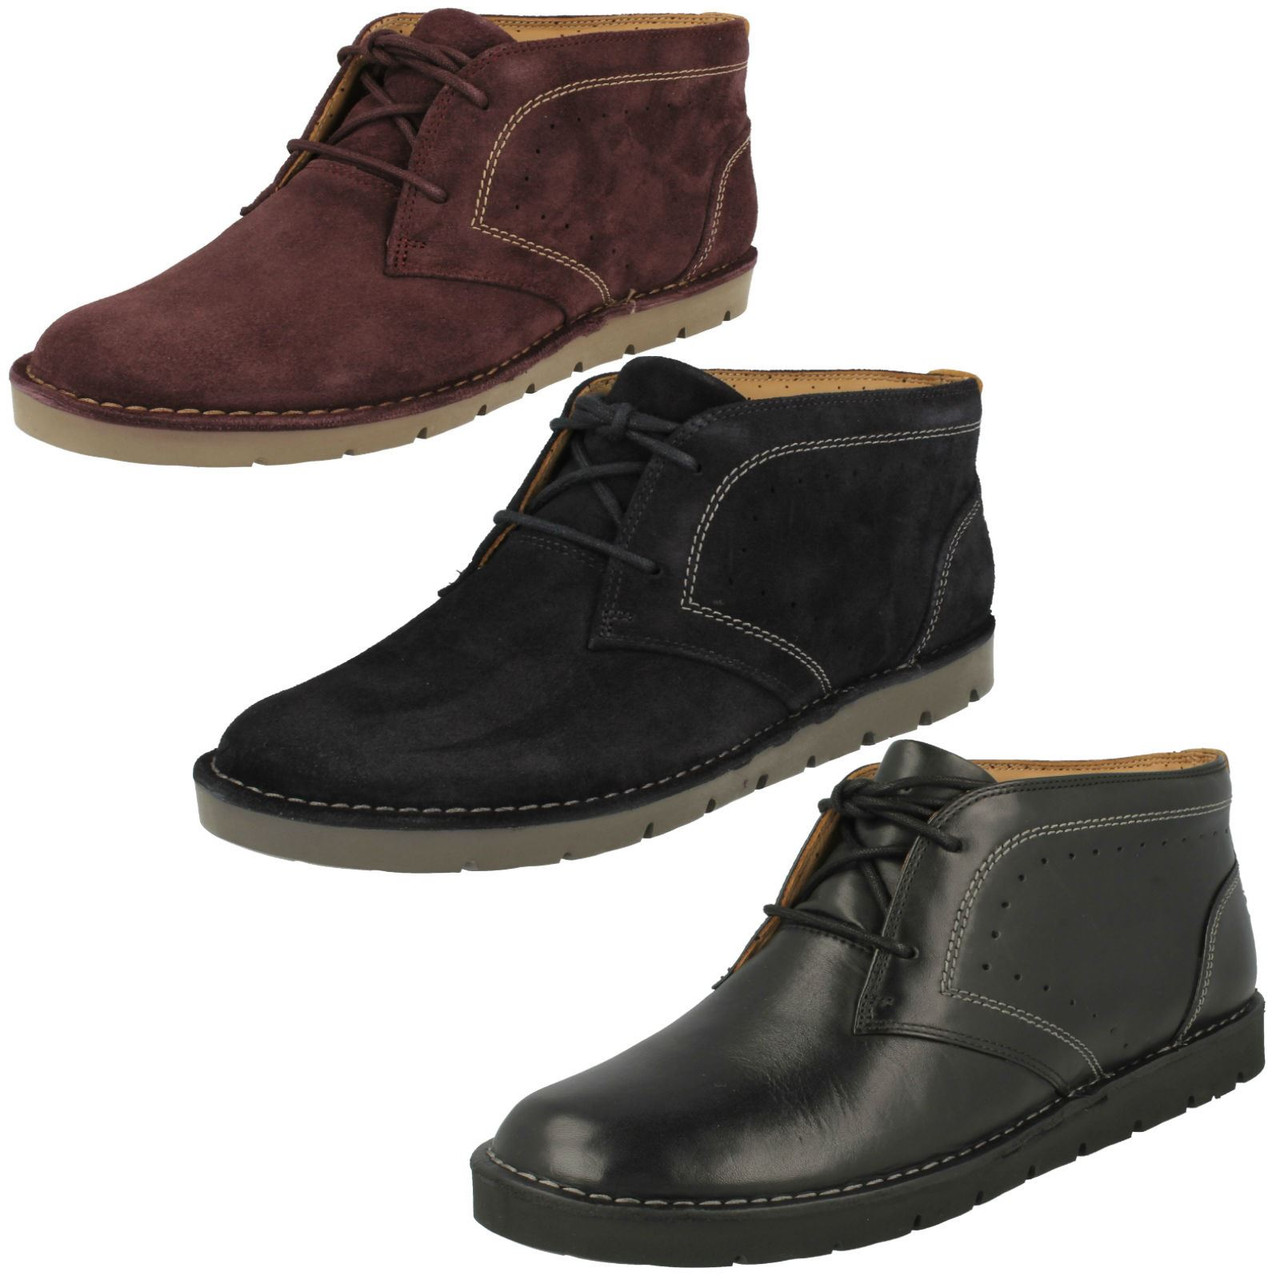 clarks unstructured ankle boots